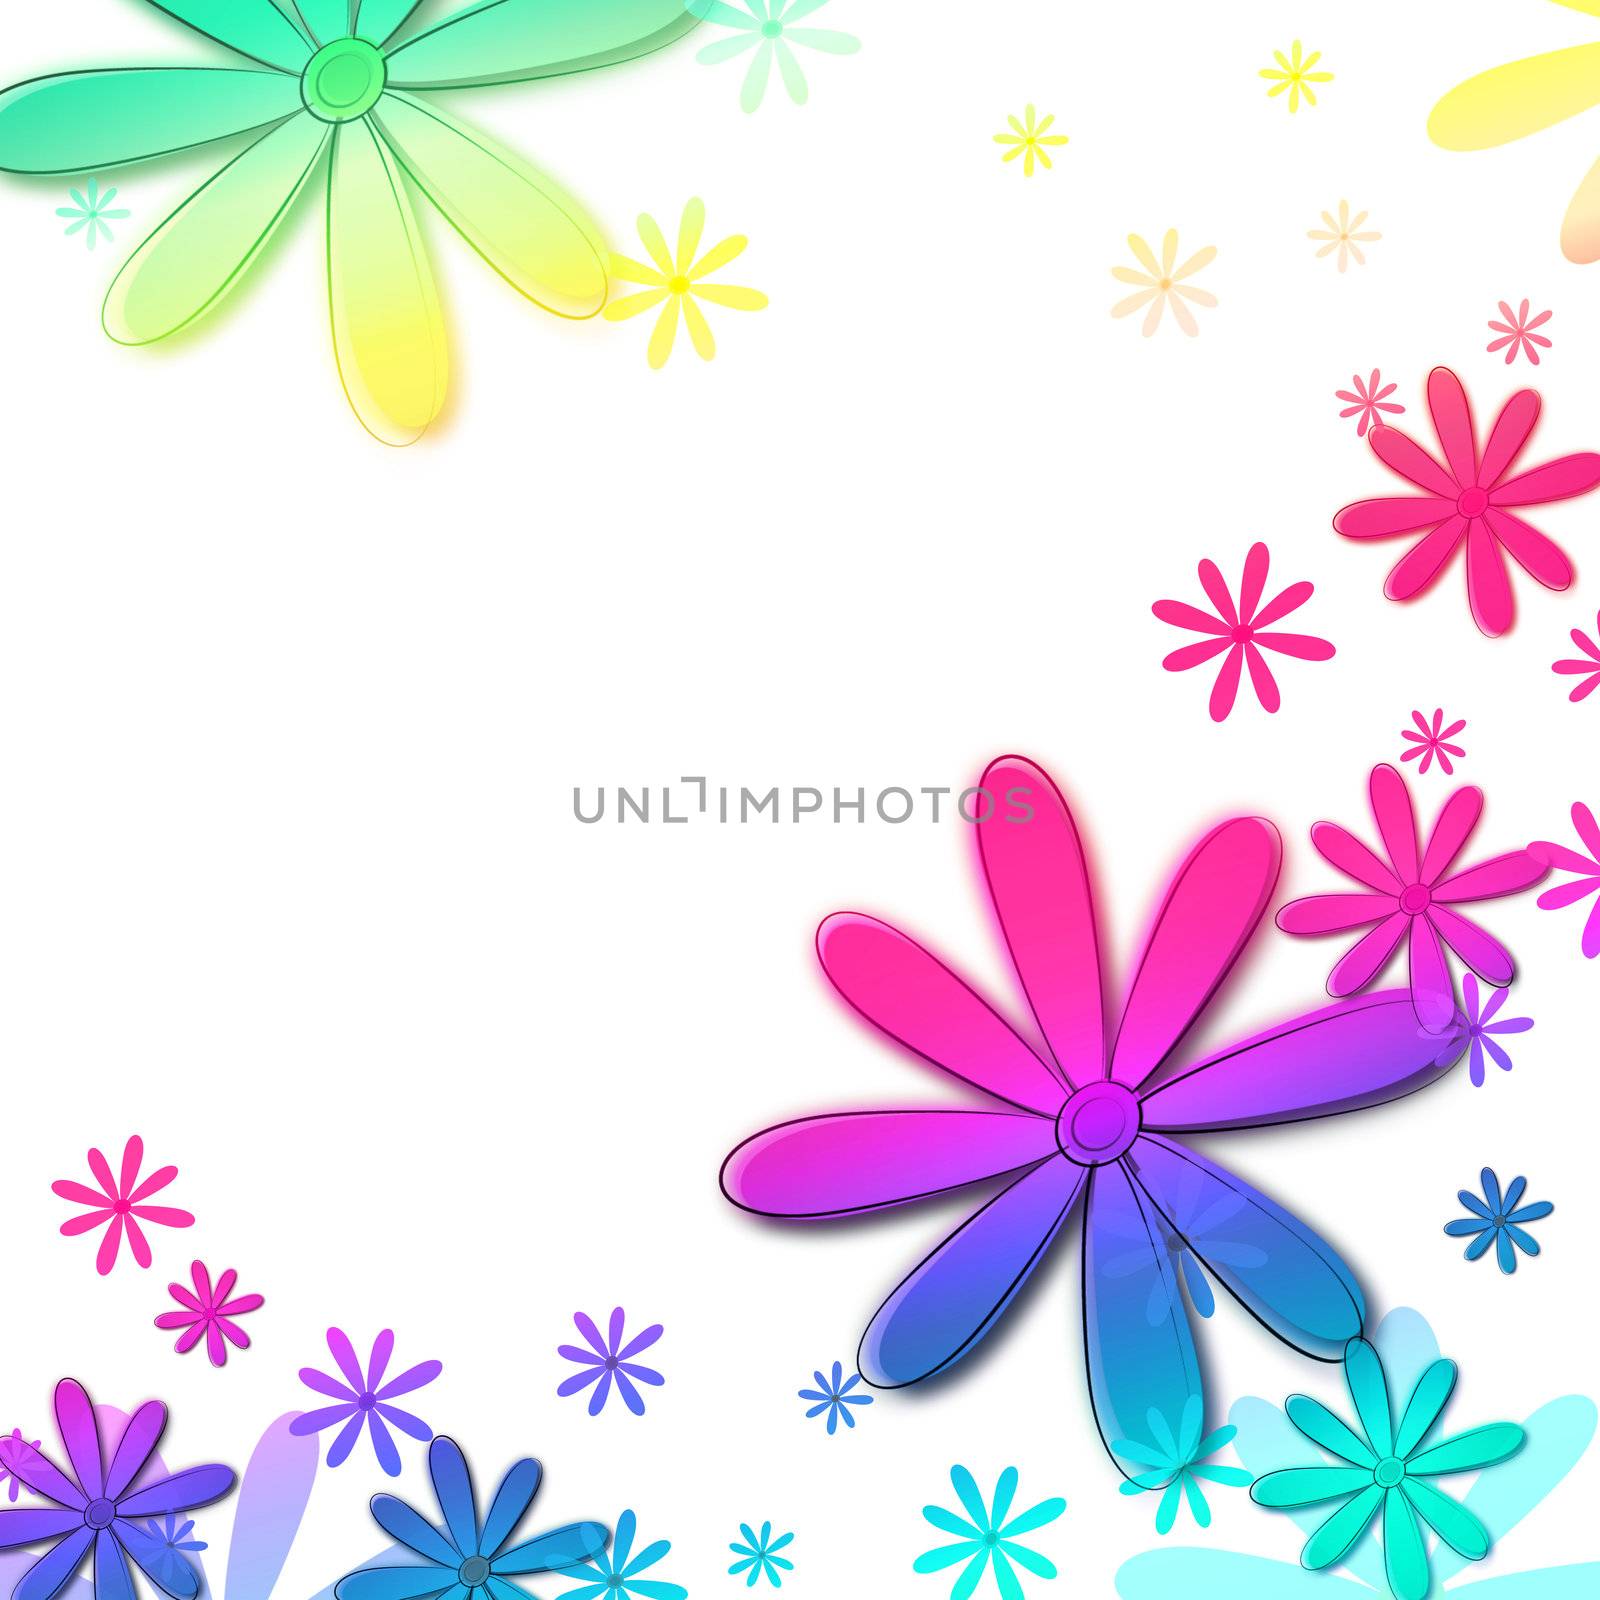 spring background with multicolored flowers over white gradient